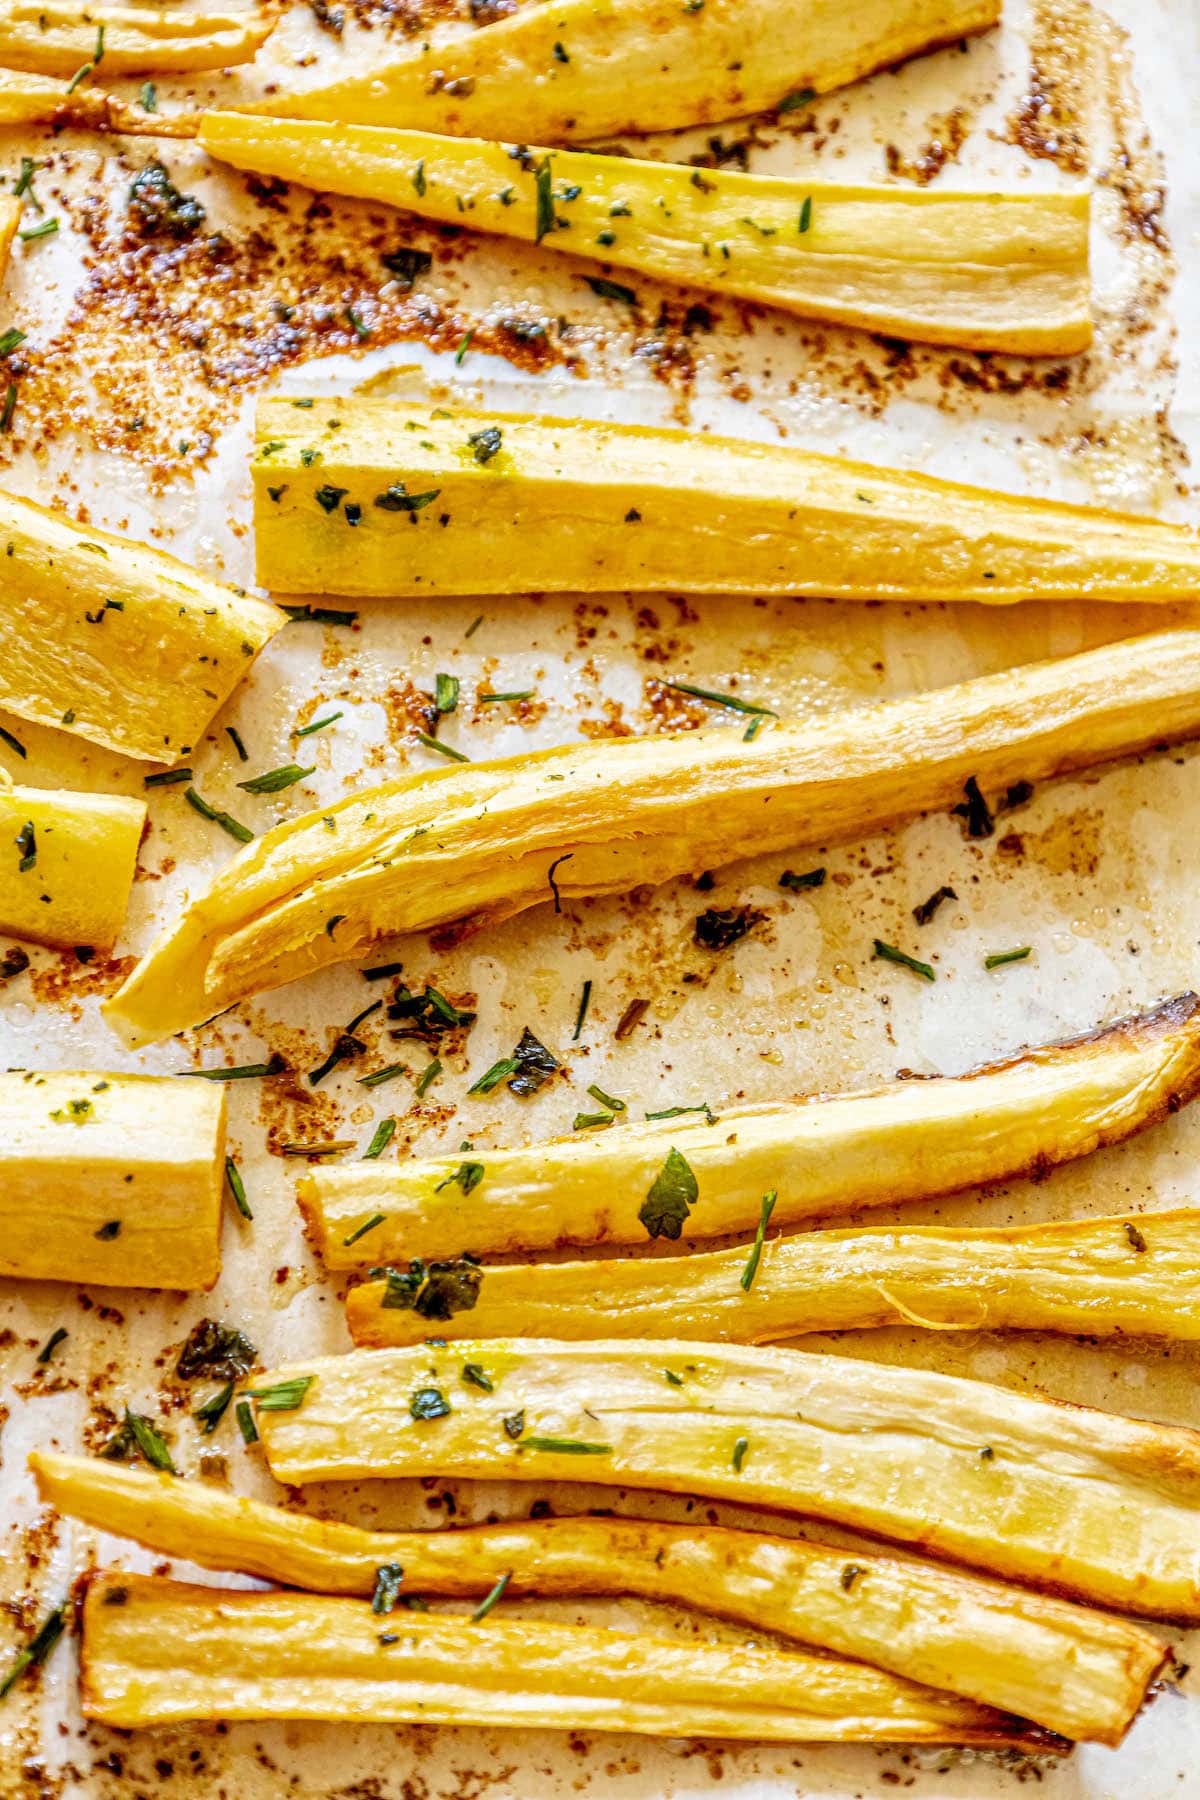 roasted parsnips on a baking sheet lined with parchment paper seasoned with garlic butter and herbs